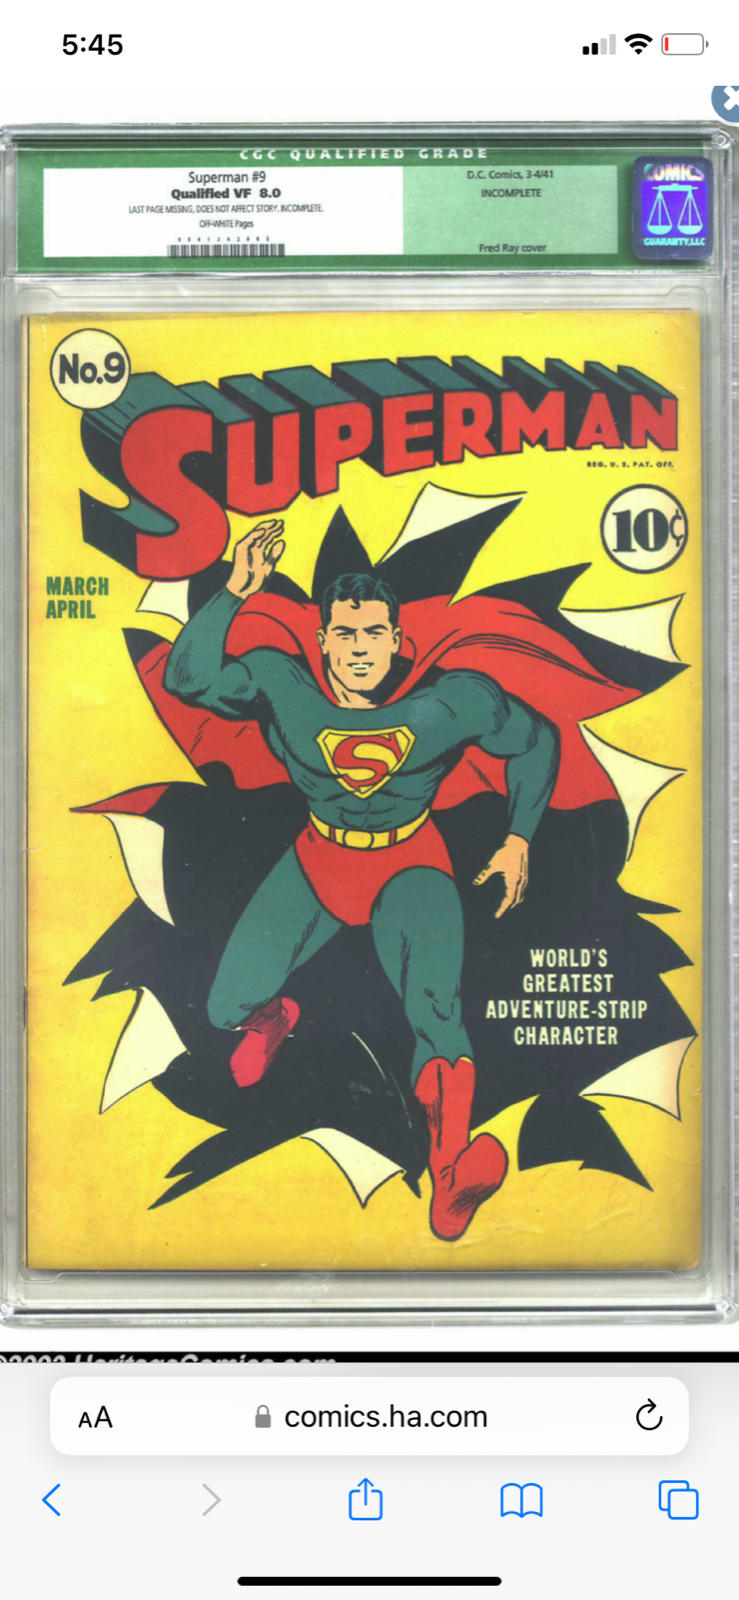 RARE 1941 GOLDEN AGE SUPERMAN 9 CGC 80 FRED RAY COVER STORY COMPLETE